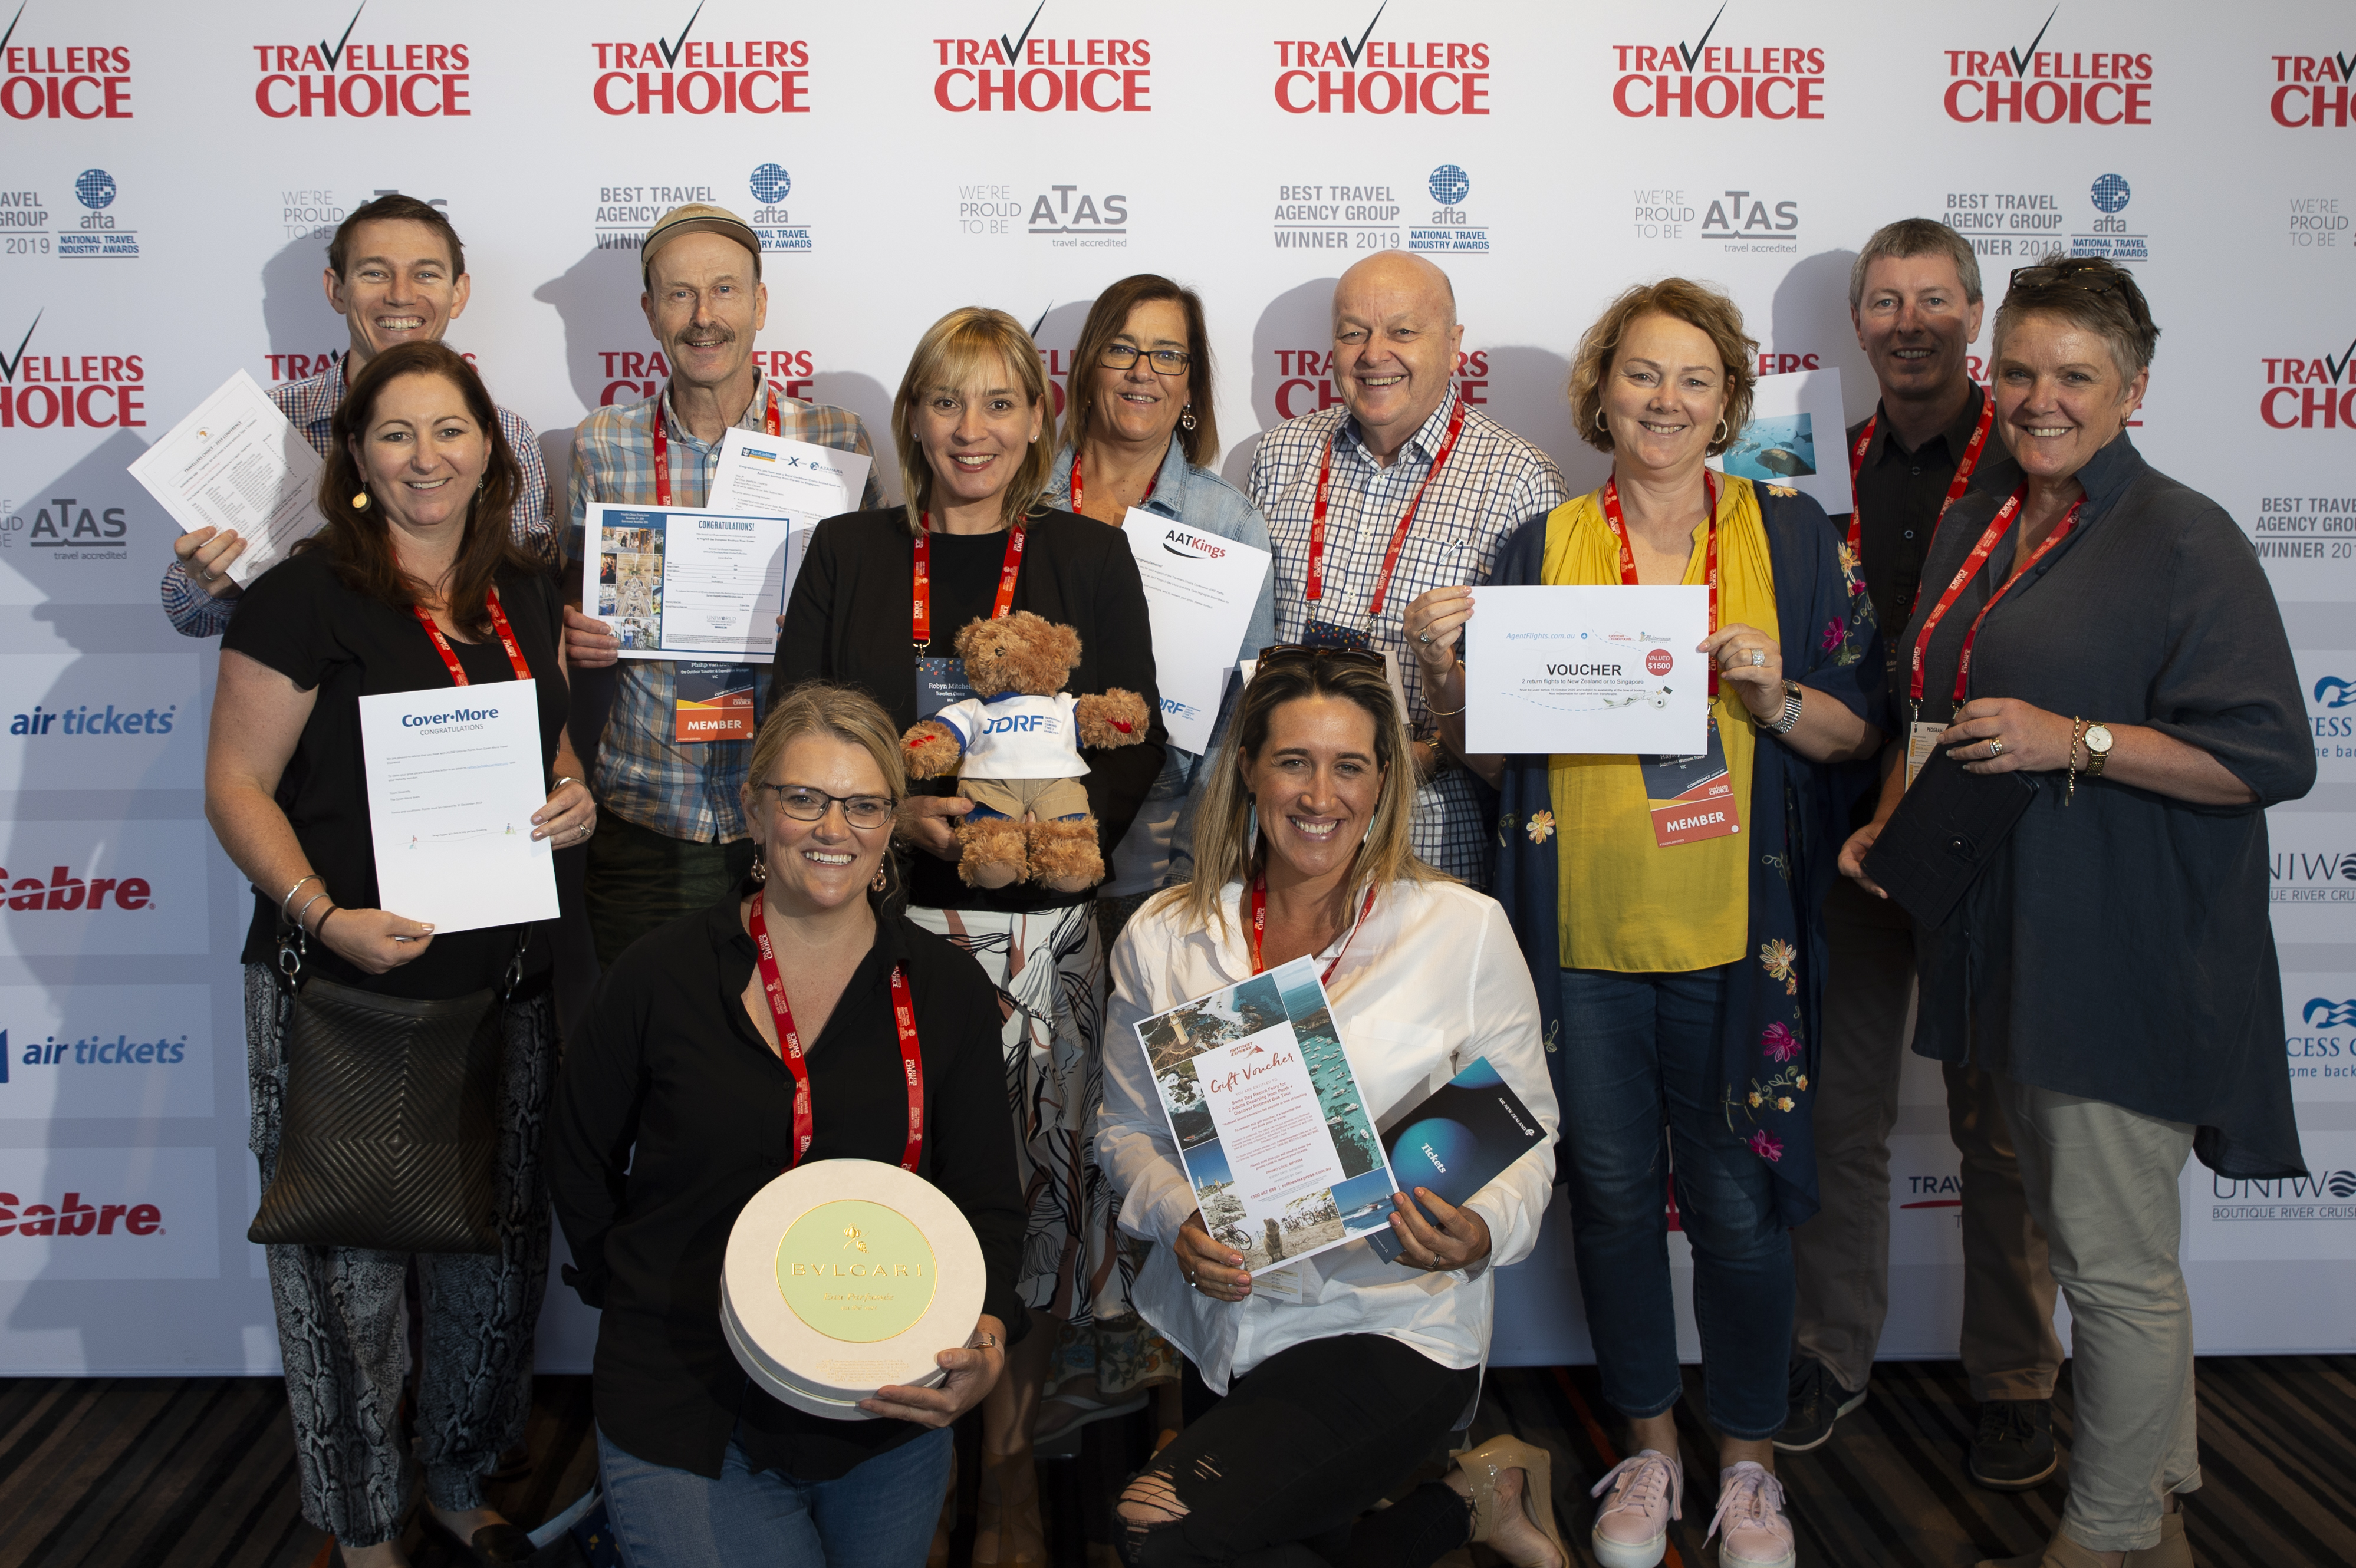 Travellers Choice’s generous members and winners of the JRDF raffle at the 2019 Travellers Choice Conference pictured with General Manager Marketing Robyn Mitchell.